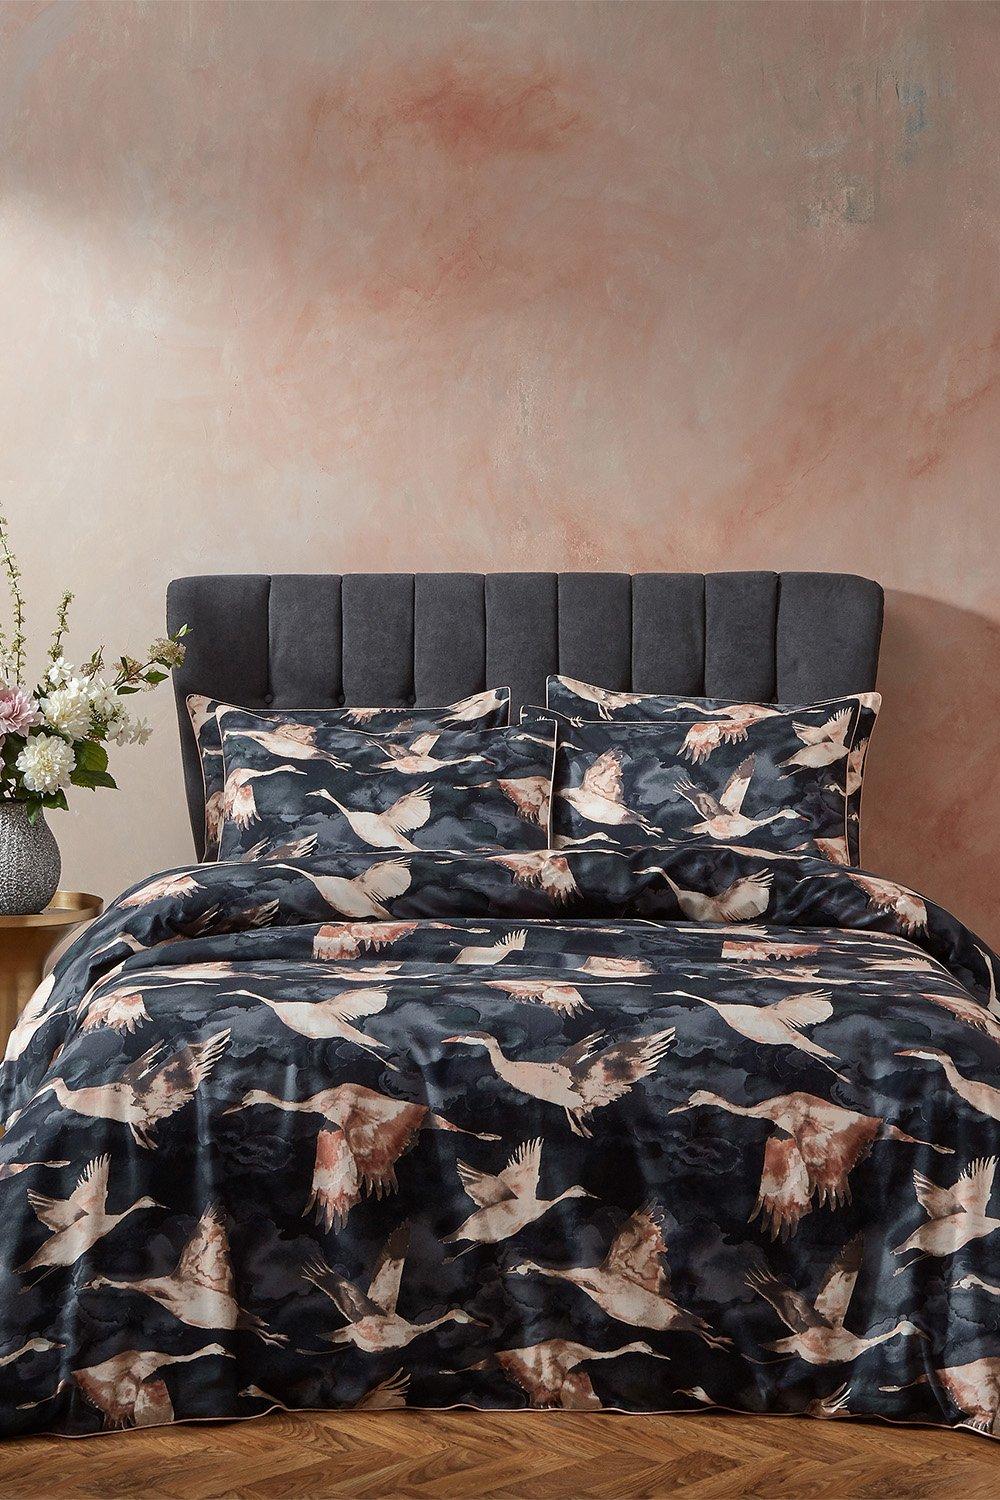 Flyway Birds Luxury Cotton Piped Duvet Cover Set